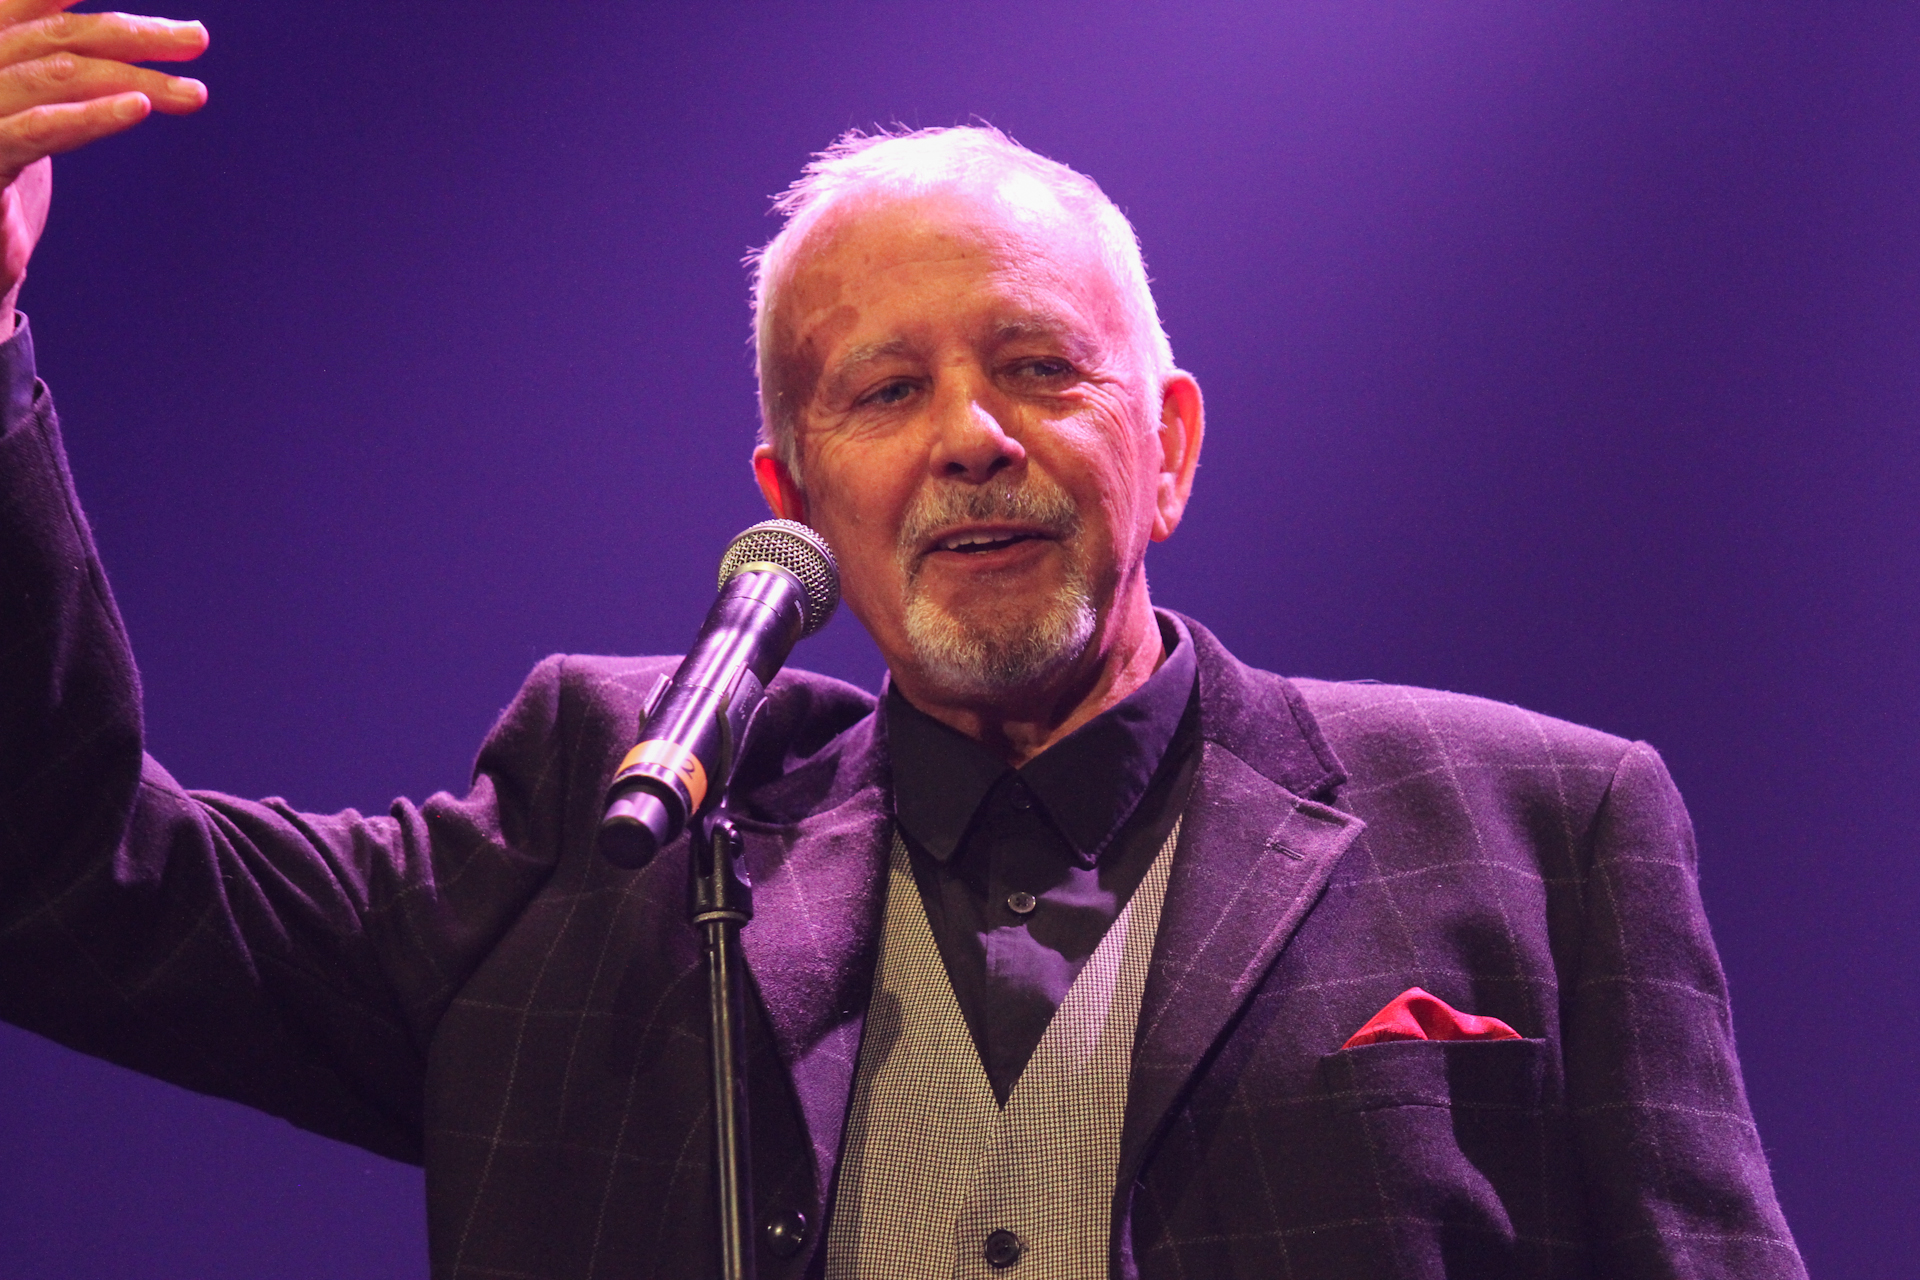 David Essex on The Golden Years